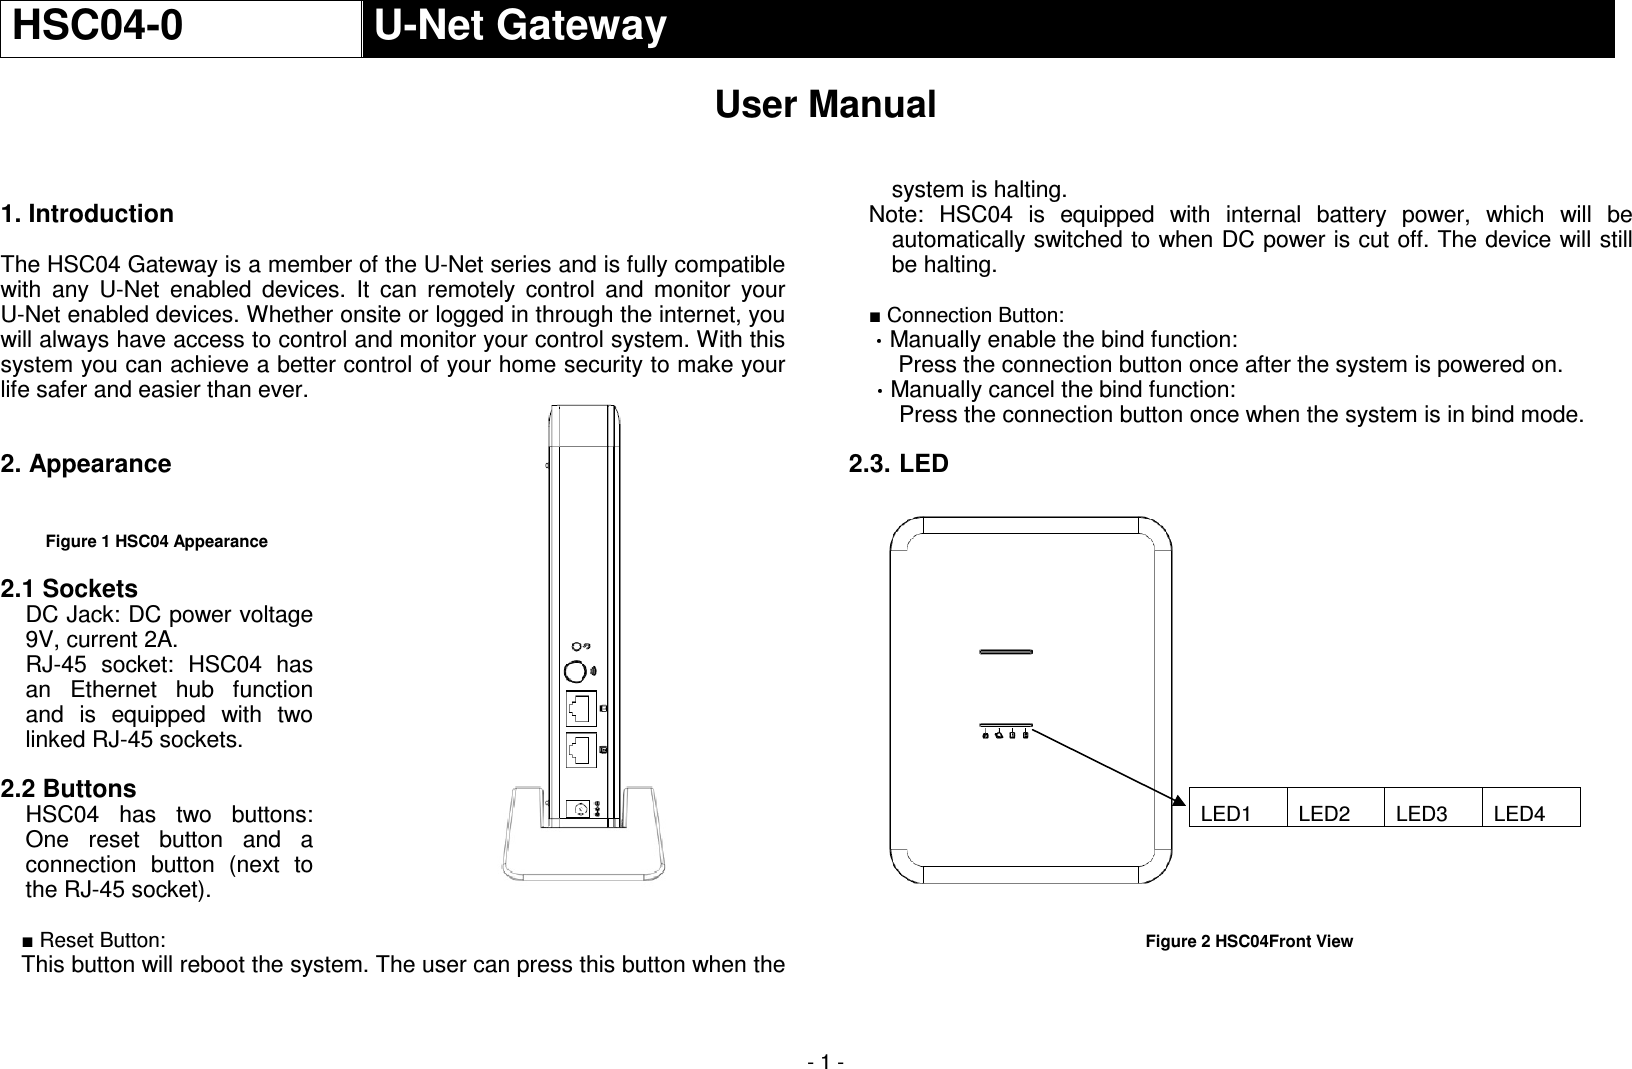  - 1 - HSC04-0  U-Net Gateway  User Manual    1. Introduction    The HSC04 Gateway is a member of the U-Net series and is fully compatible with  any  U-Net  enabled  devices.  It  can  remotely  control  and  monitor  your U-Net enabled devices. Whether onsite or logged in through the internet, you will always have access to control and monitor your control system. With this system you can achieve a better control of your home security to make your life safer and easier than ever.  2. Appearance   Figure 1 HSC04 Appearance  2.1 Sockets DC Jack: DC power voltage 9V, current 2A. RJ-45  socket:  HSC04  has an  Ethernet  hub  function and  is  equipped  with  two linked RJ-45 sockets.  2.2 Buttons HSC04  has  two  buttons: One  reset  button  and  a connection  button  (next  to the RJ-45 socket).  ■ Reset Button: This button will reboot the system. The user can press this button when the system is halting. Note:  HSC04  is  equipped  with  internal  battery  power,  which  will  be automatically switched to when DC power is cut off. The device will still be halting.  ■ Connection Button: Manually enable the bind function: Press the connection button once after the system is powered on. Manually cancel the bind function: Press the connection button once when the system is in bind mode.  2.3. LED             Figure 2 HSC04Front View  LED1  LED2  LED3  LED4  